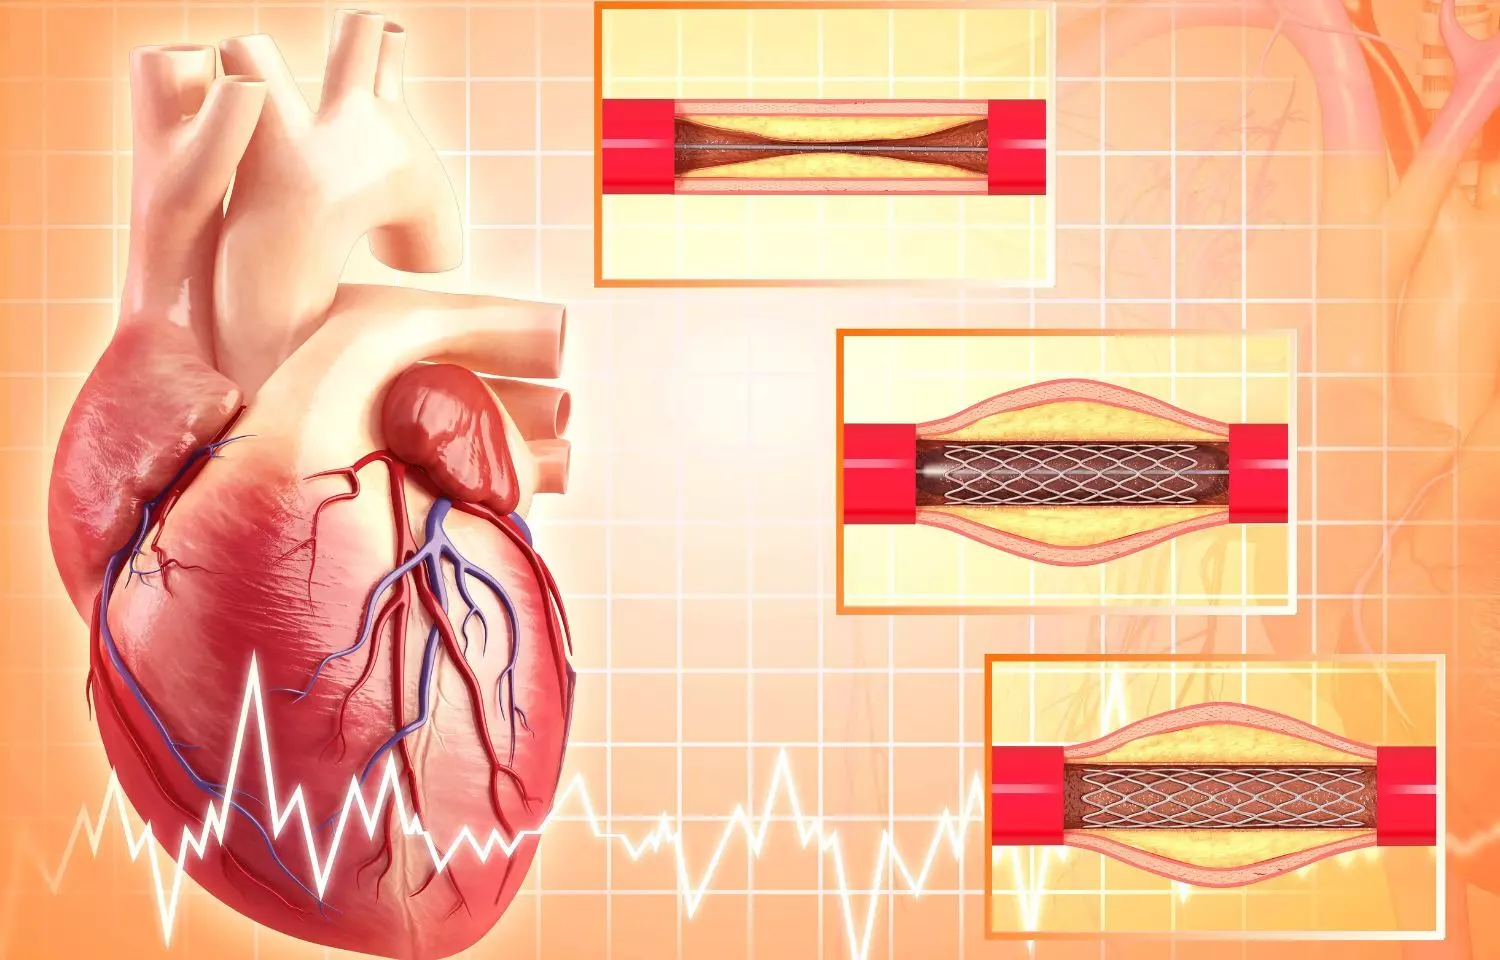 Coronary stenting may not benefit patients of CAD with severe left ventricular dysfunction